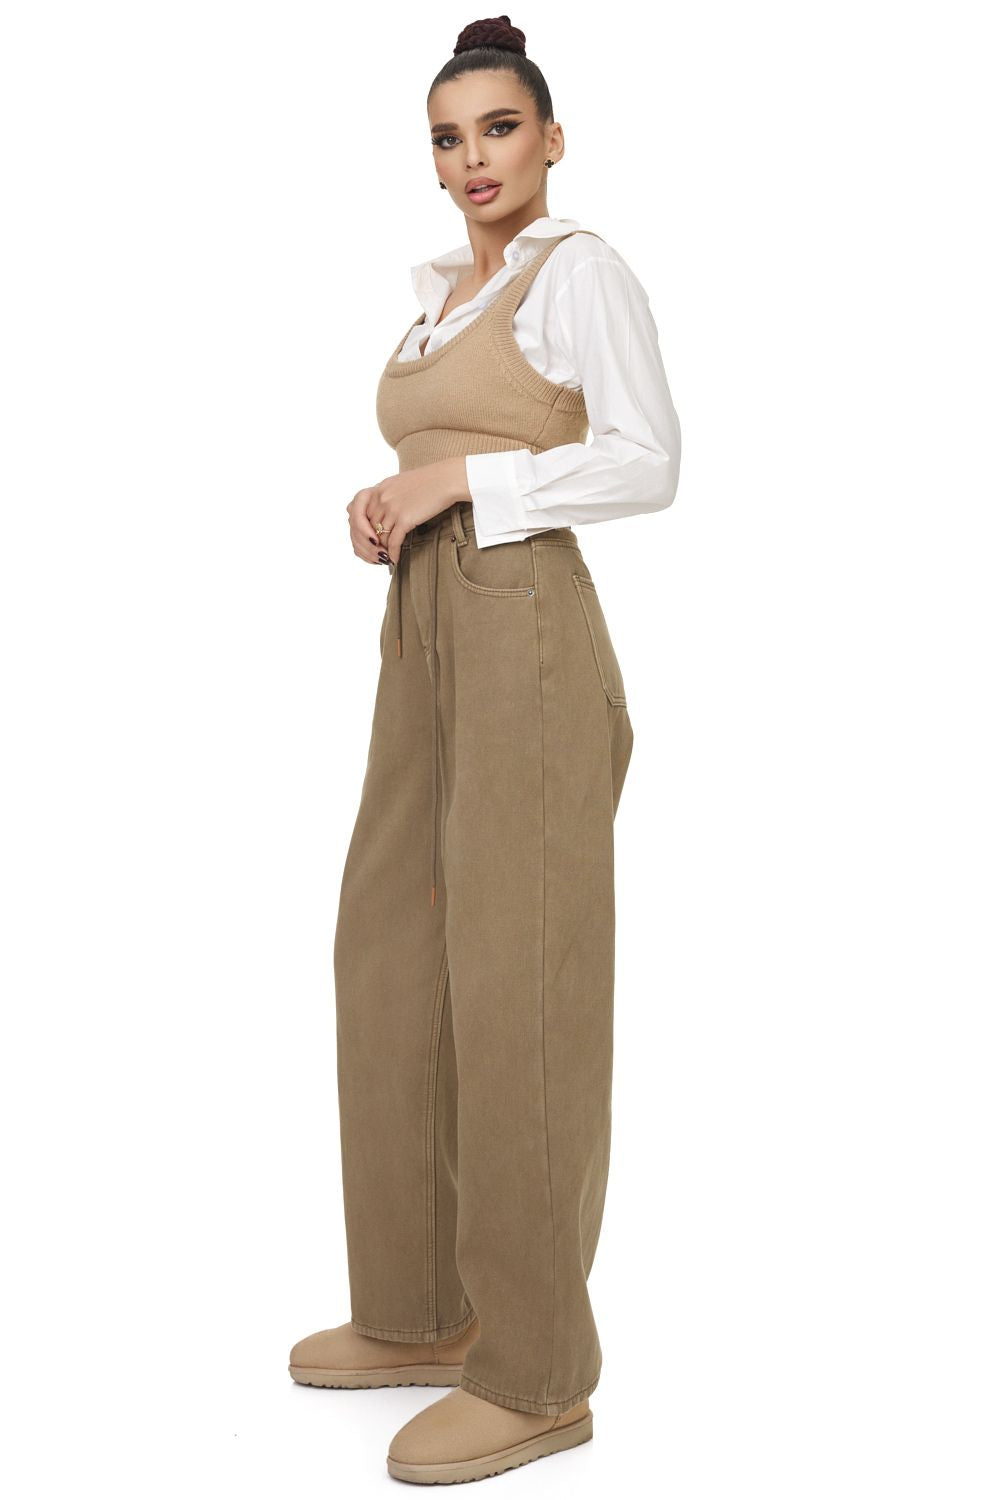 Ladies' casual brown jeans Ralukia Bogas